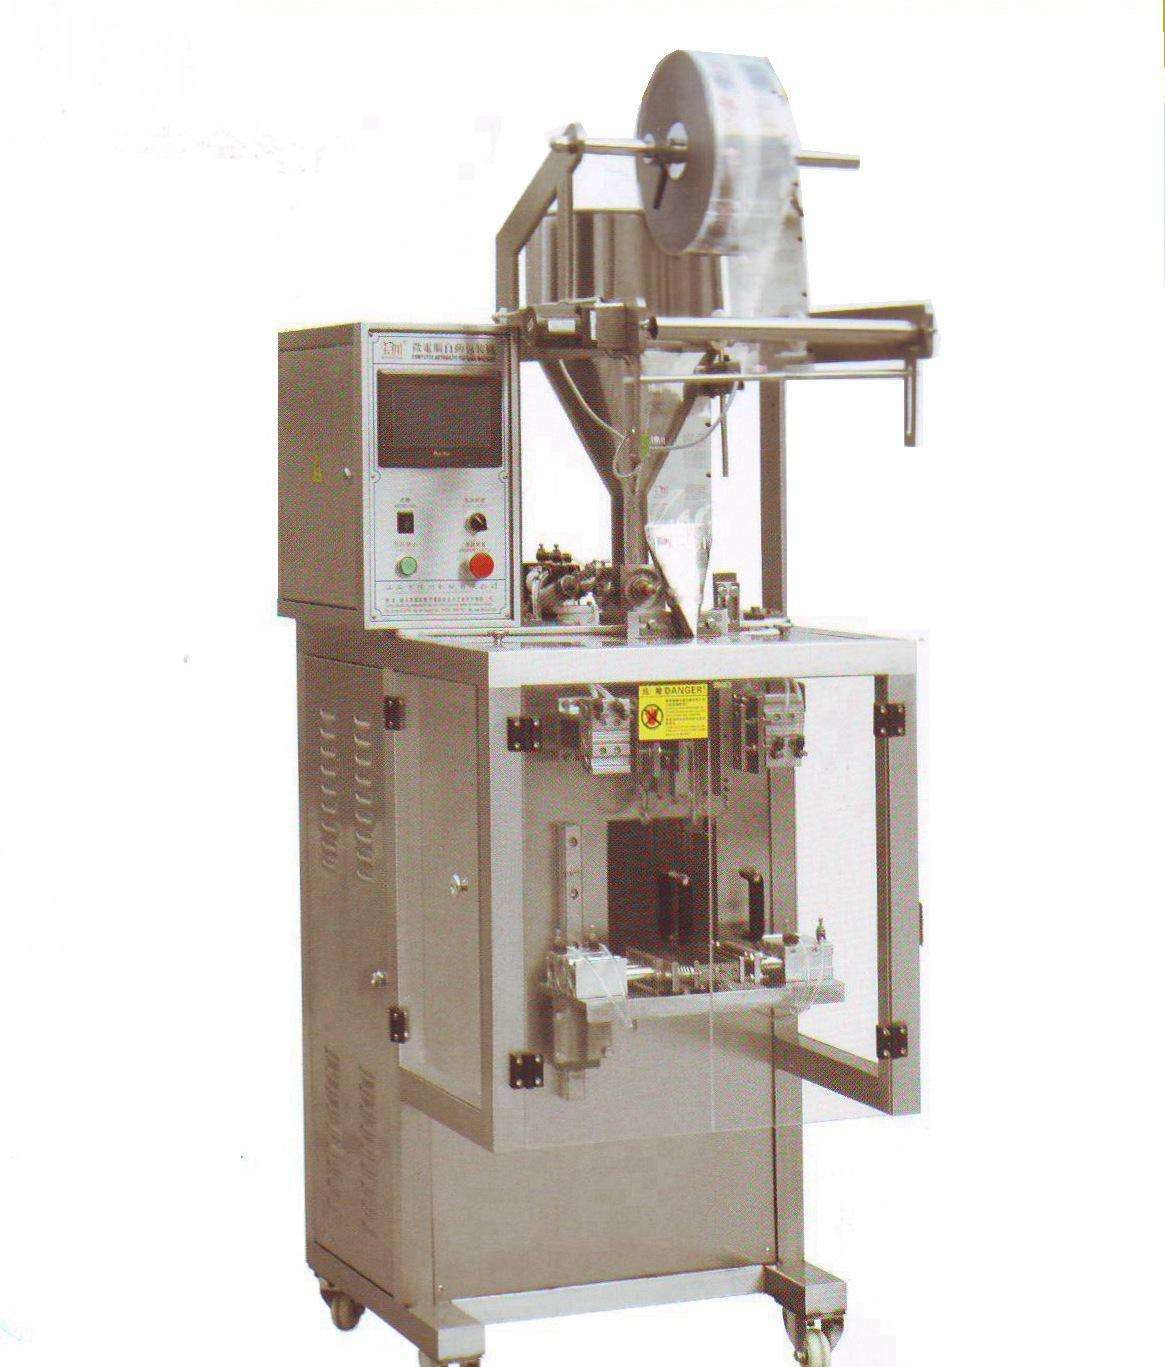 products - filling system - aseptic filling machine & ultra-clean 